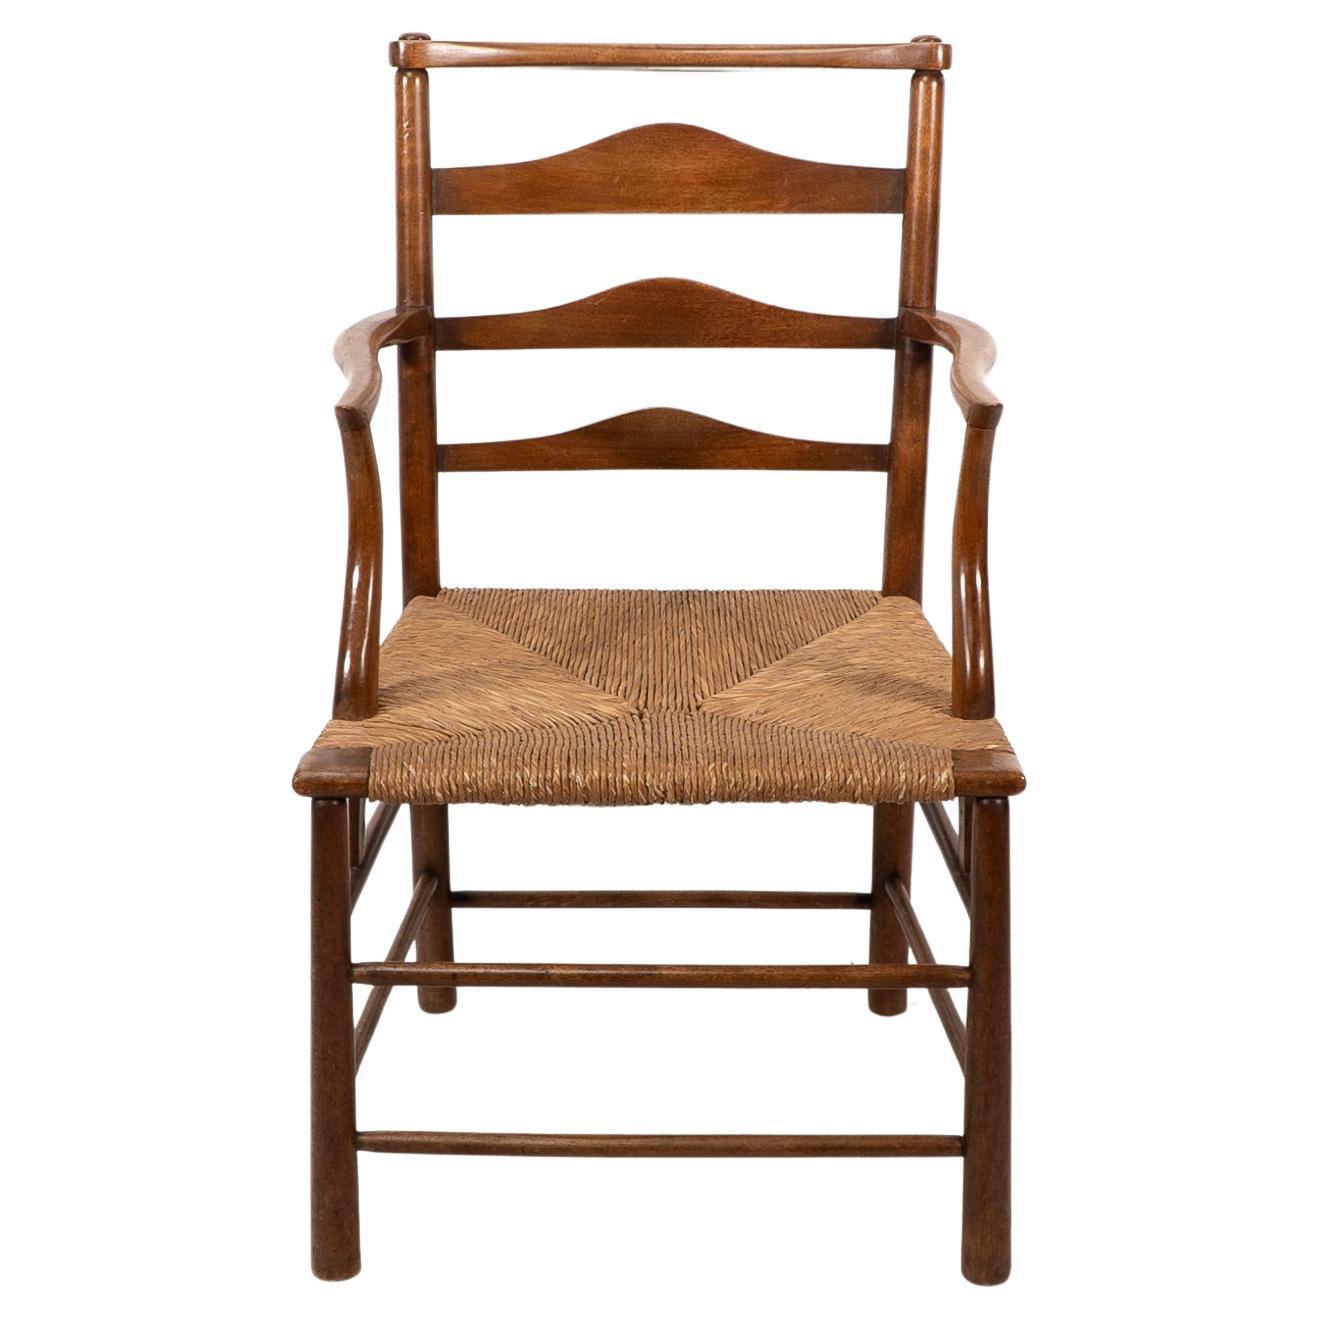 C R Ashbee. An Arts and Crafts rush seat ladder back armchair with arms that follow down through to the side stretchers. Ashbee used this version of armchair for his family home, offices and personal workshop that he built at 37 Cheyne Walk Chelsea,